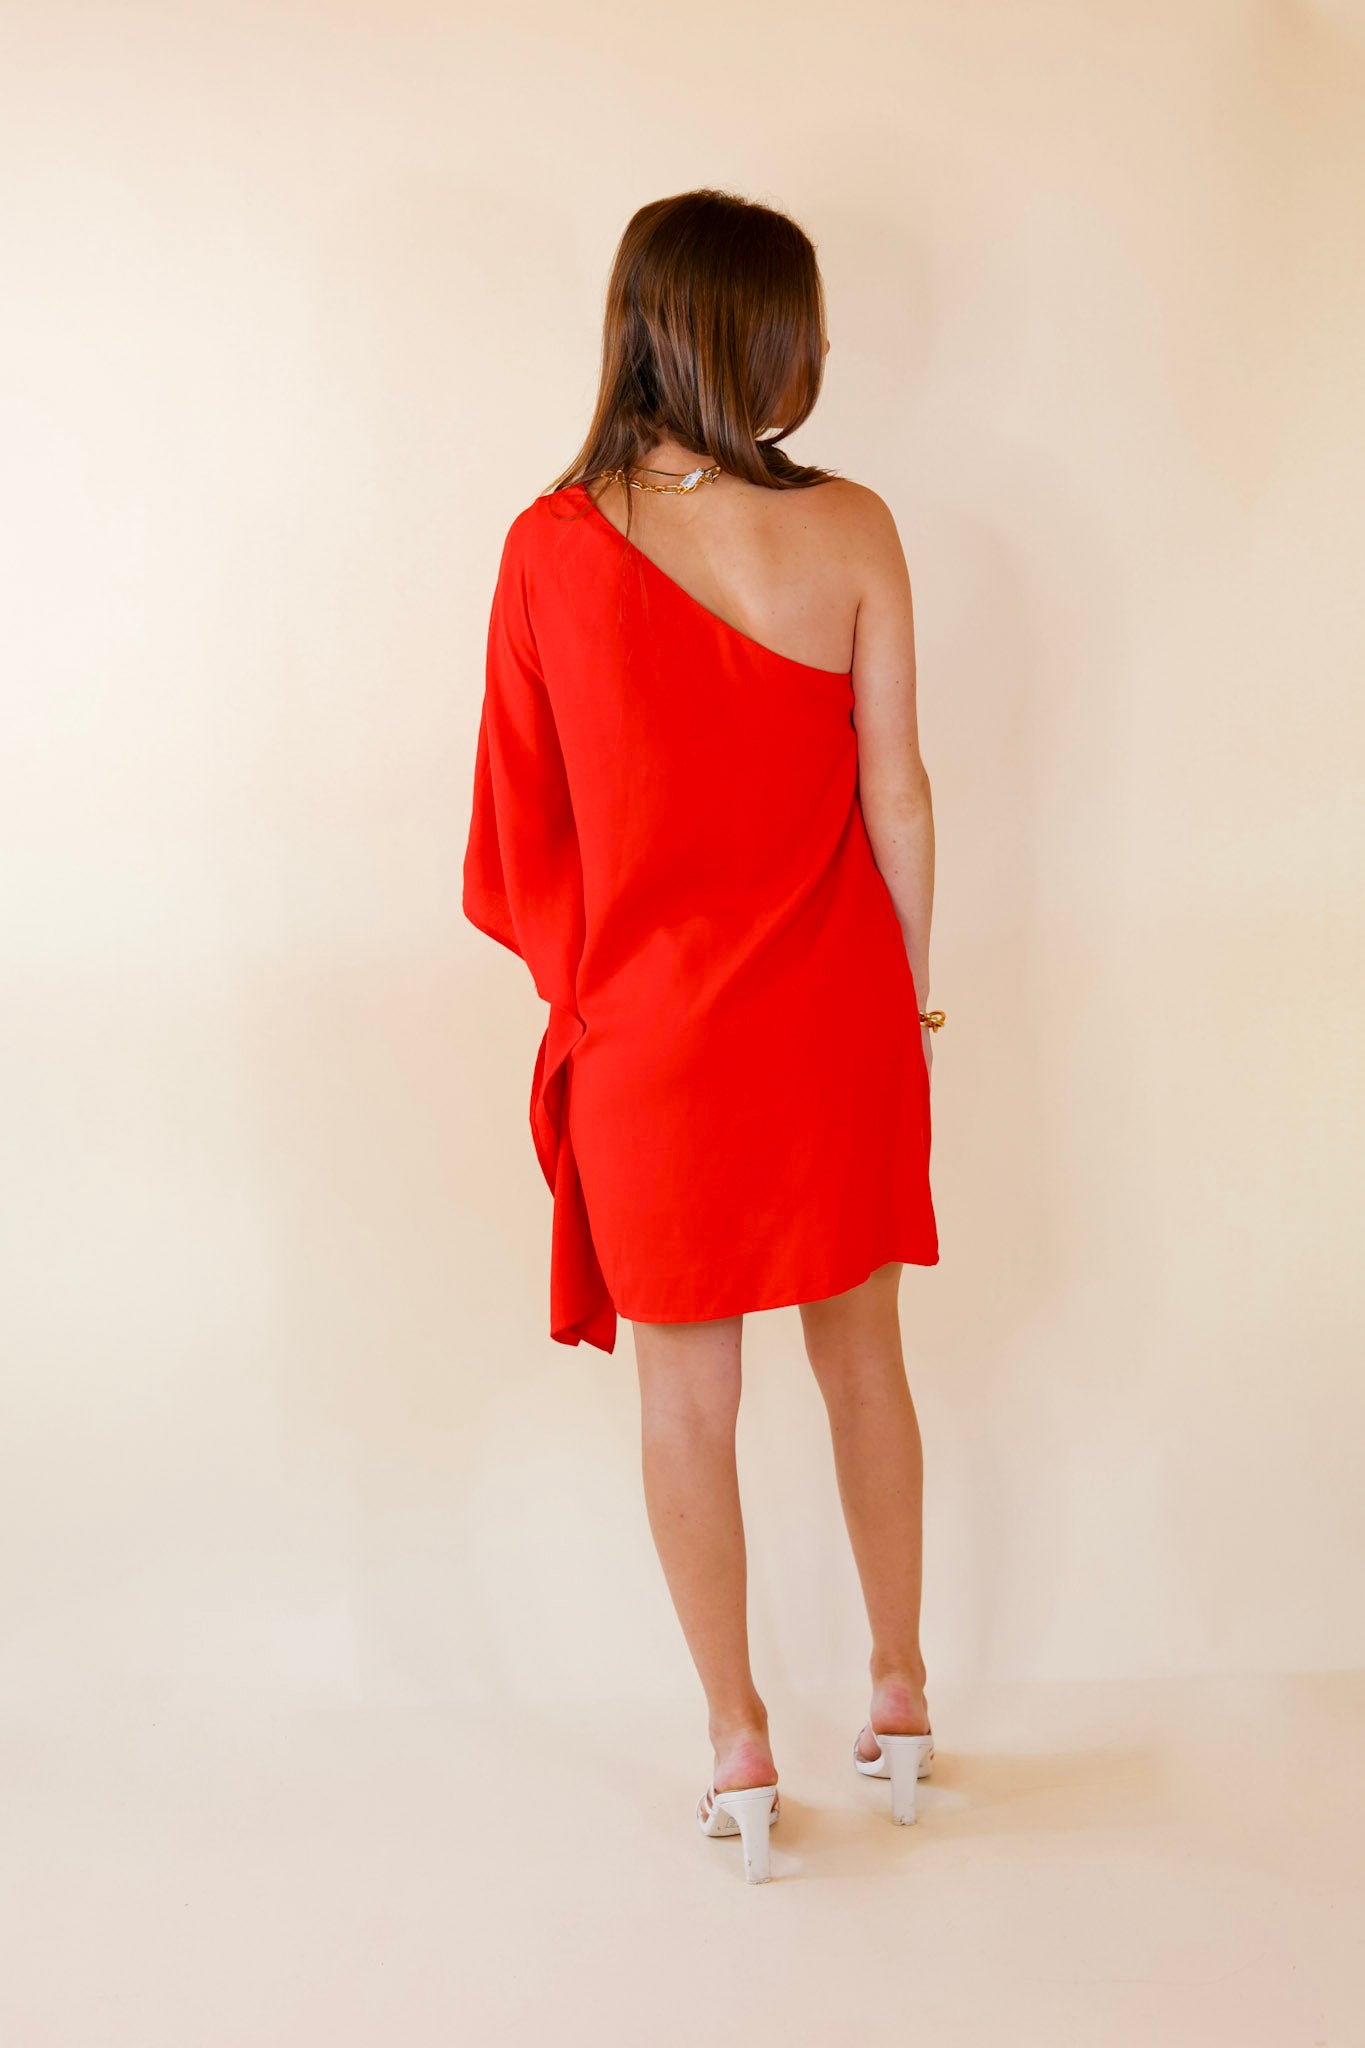 Champagne Getaway One Shoulder Dress in Red - Giddy Up Glamour Boutique